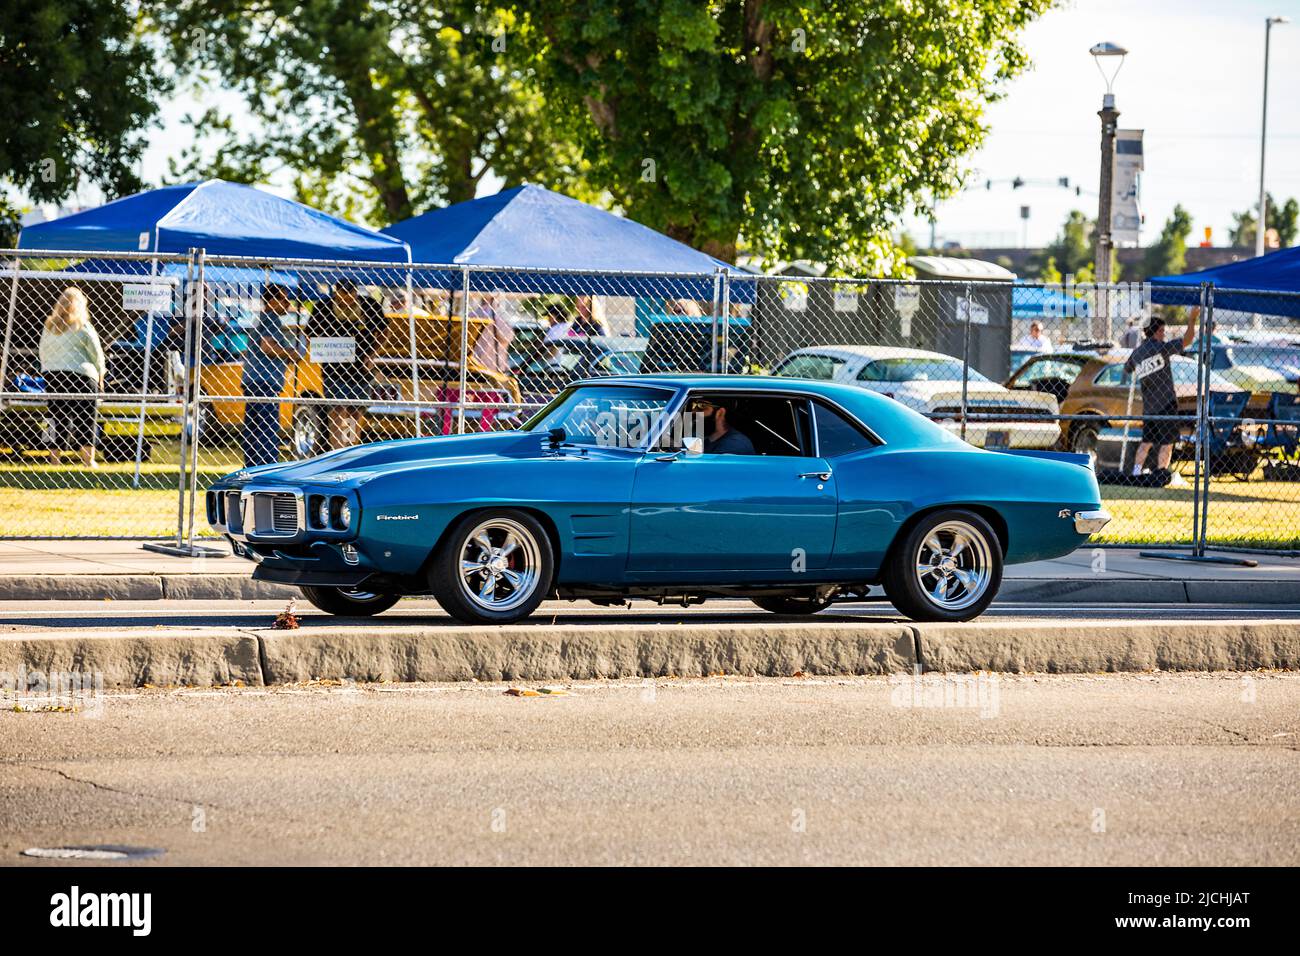 A 1969 Pontiac Firebird arrives at the American Graffiti charity Car Show at the Modesto Junior College campus June 11-12 2022 Stock Photo